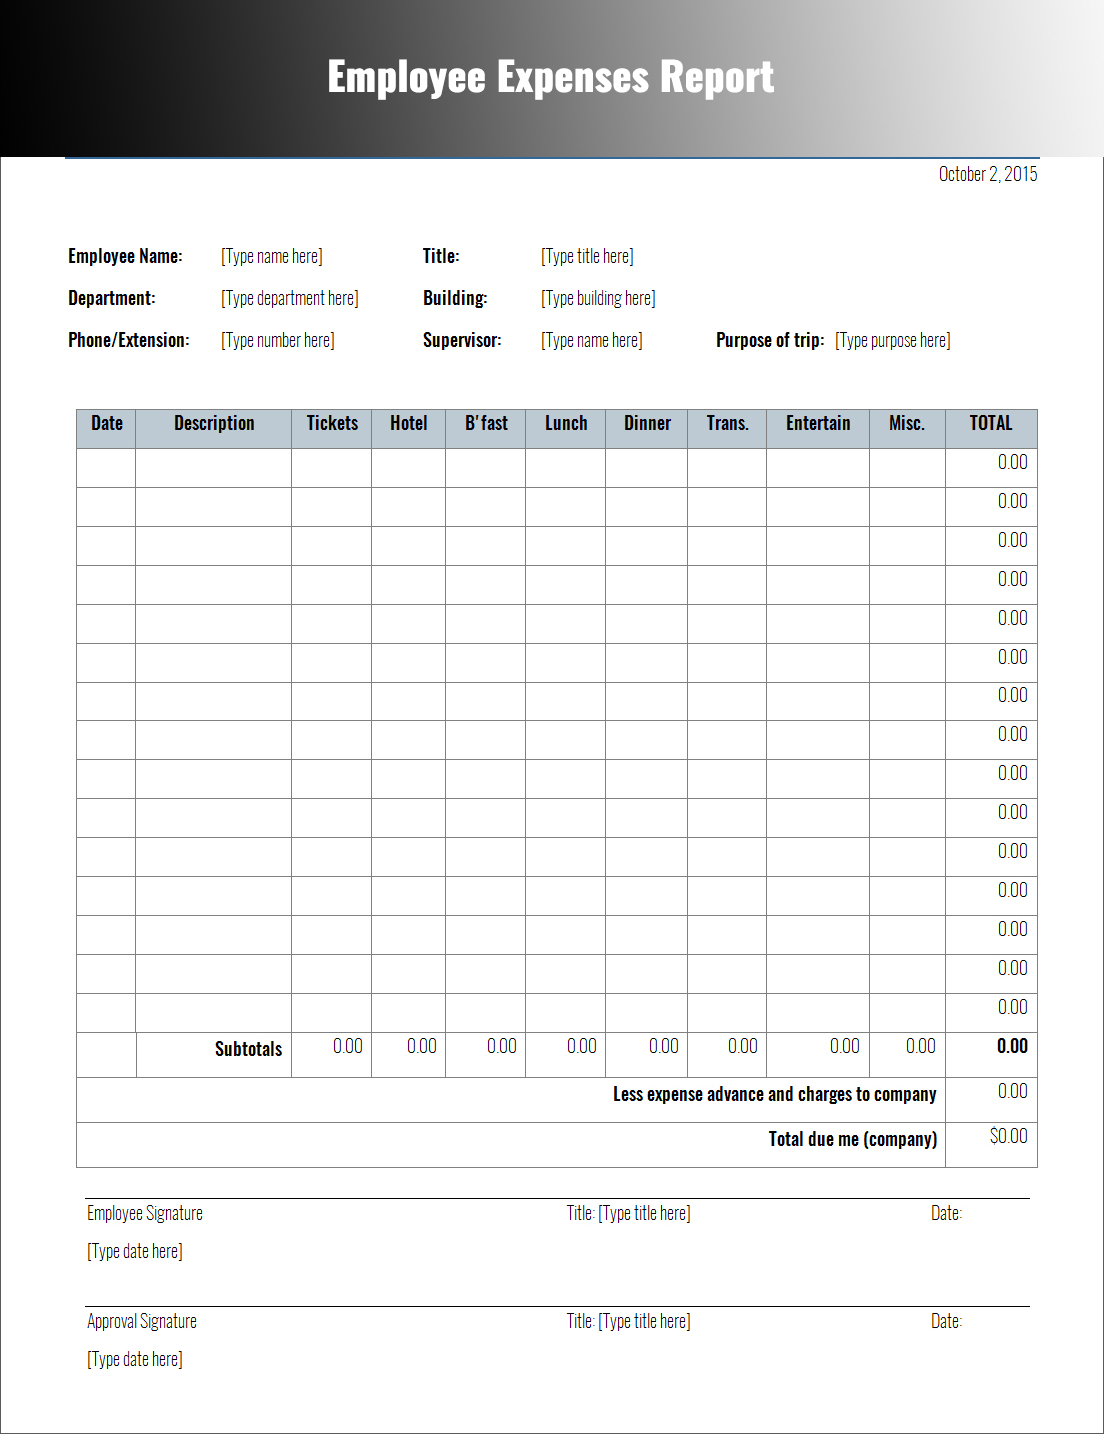 Employee Expense Report Template